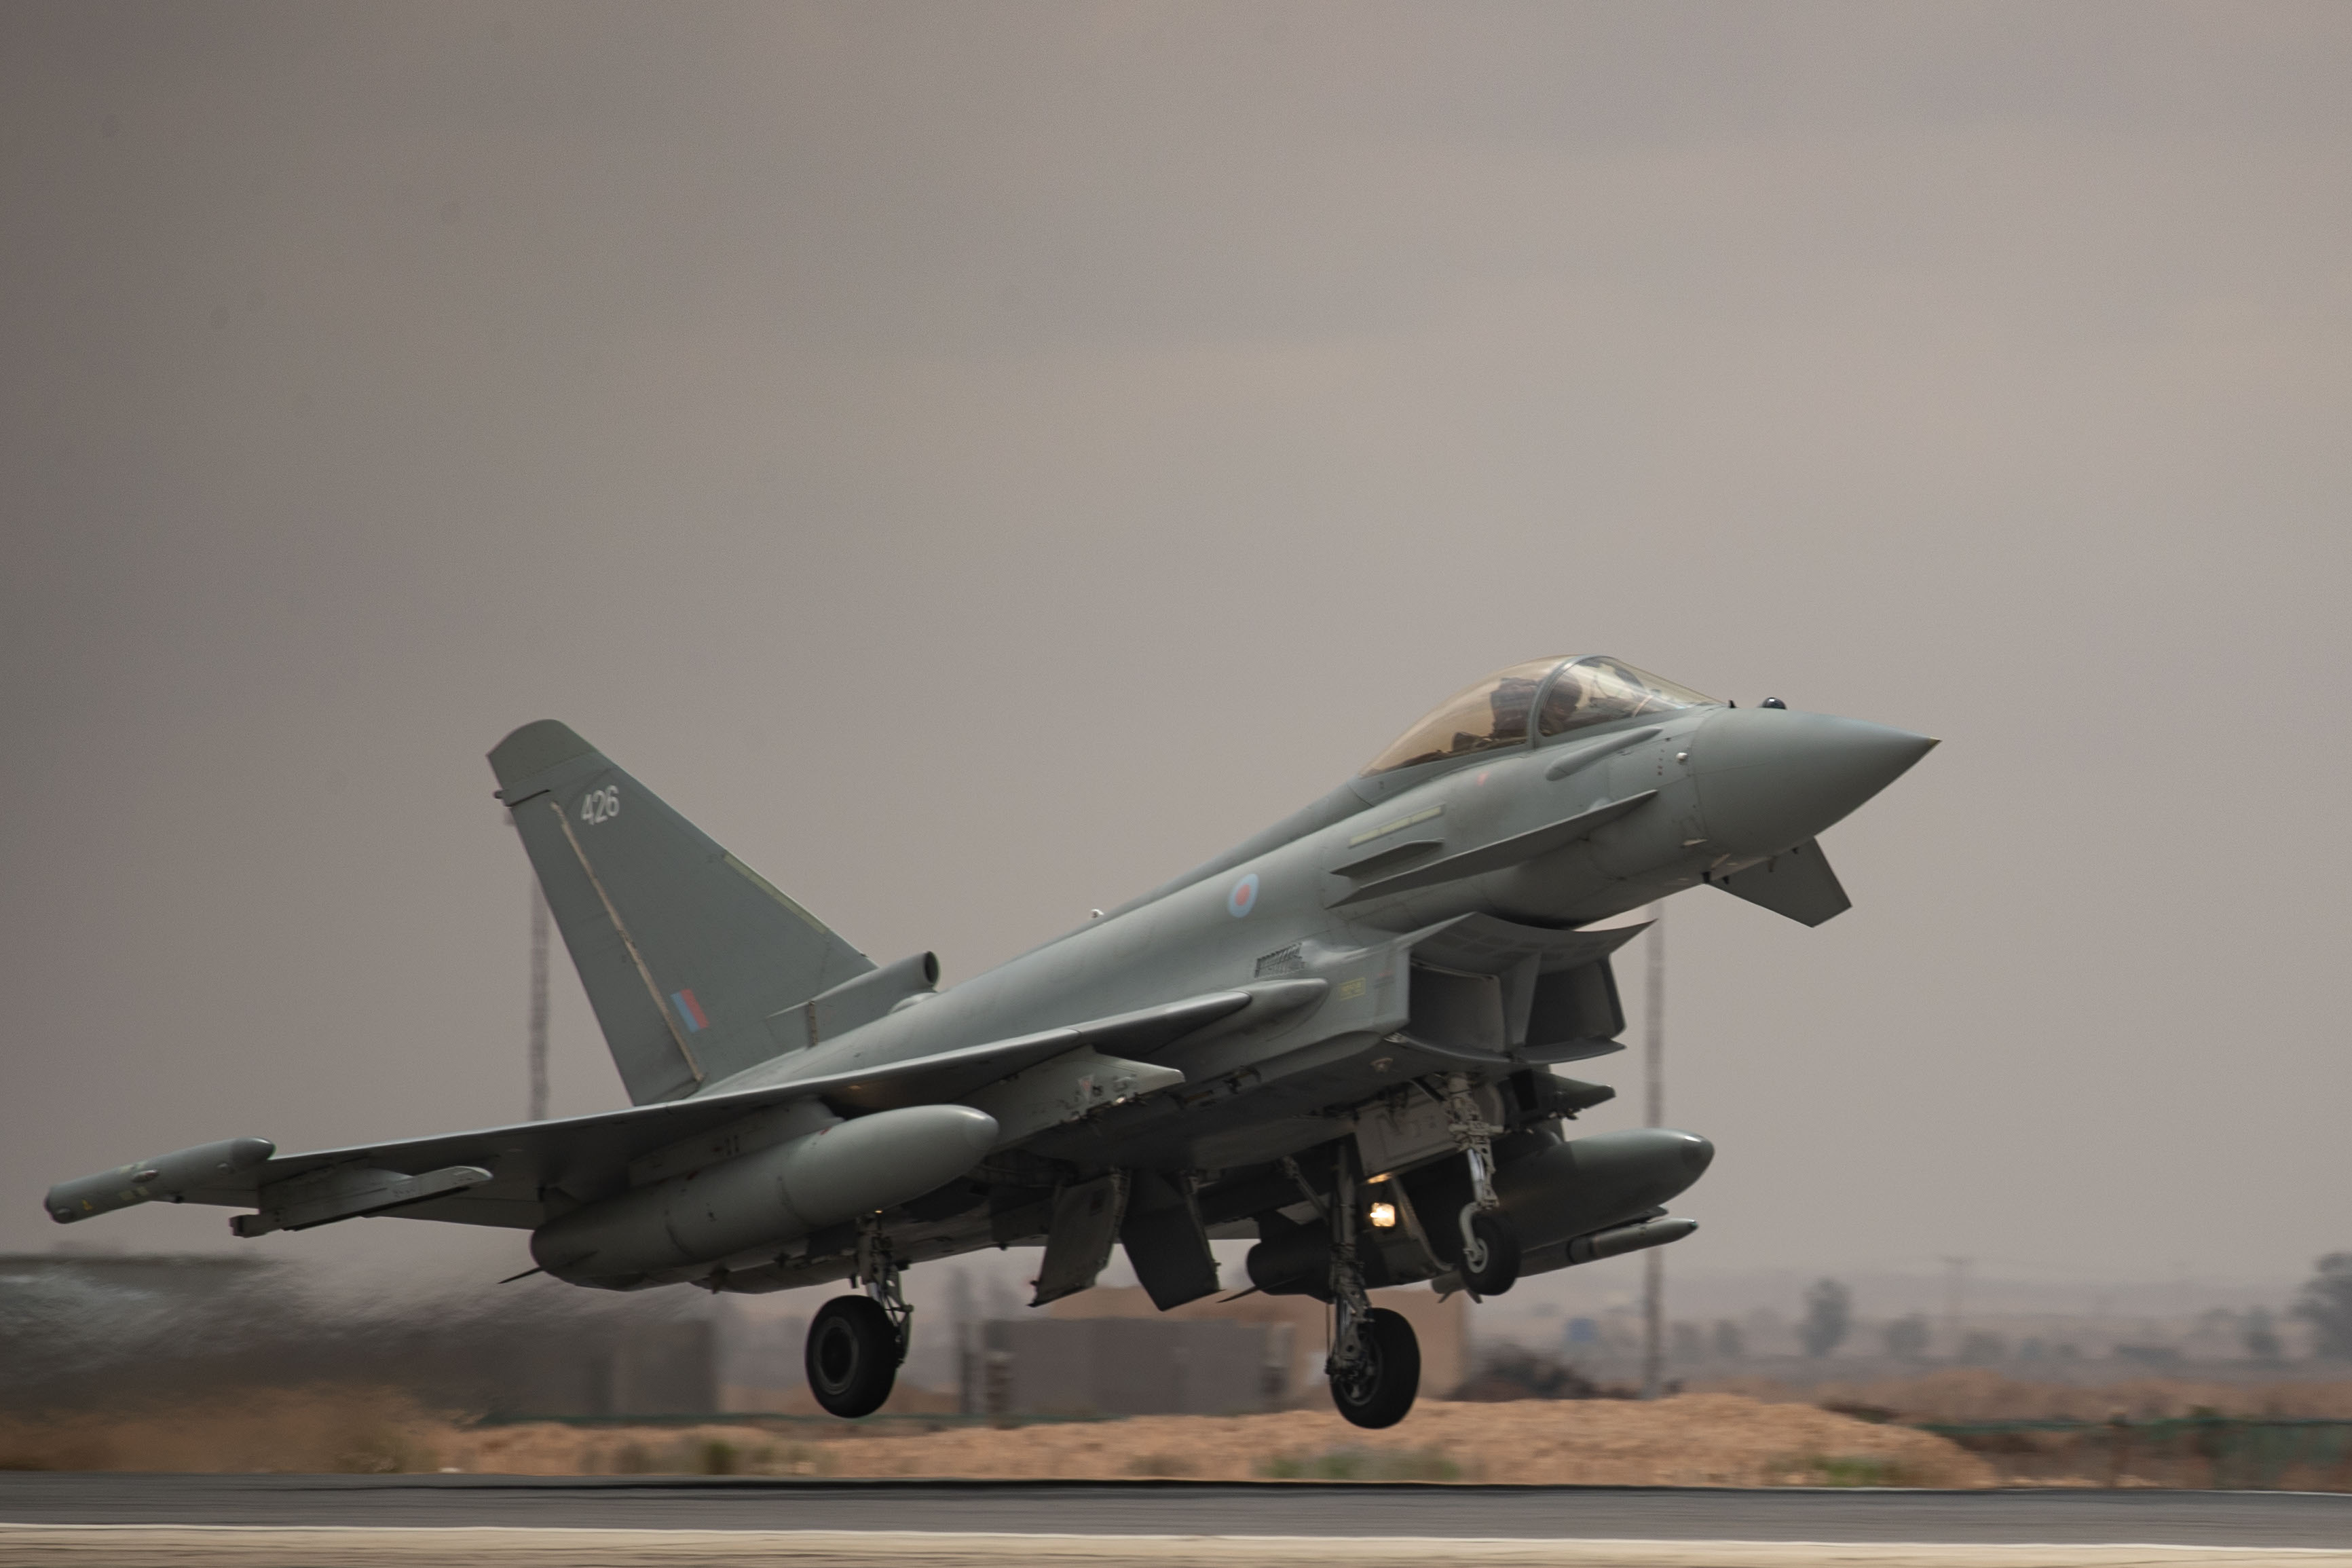 Image shows RAF Typhoon taking off from the airfield.